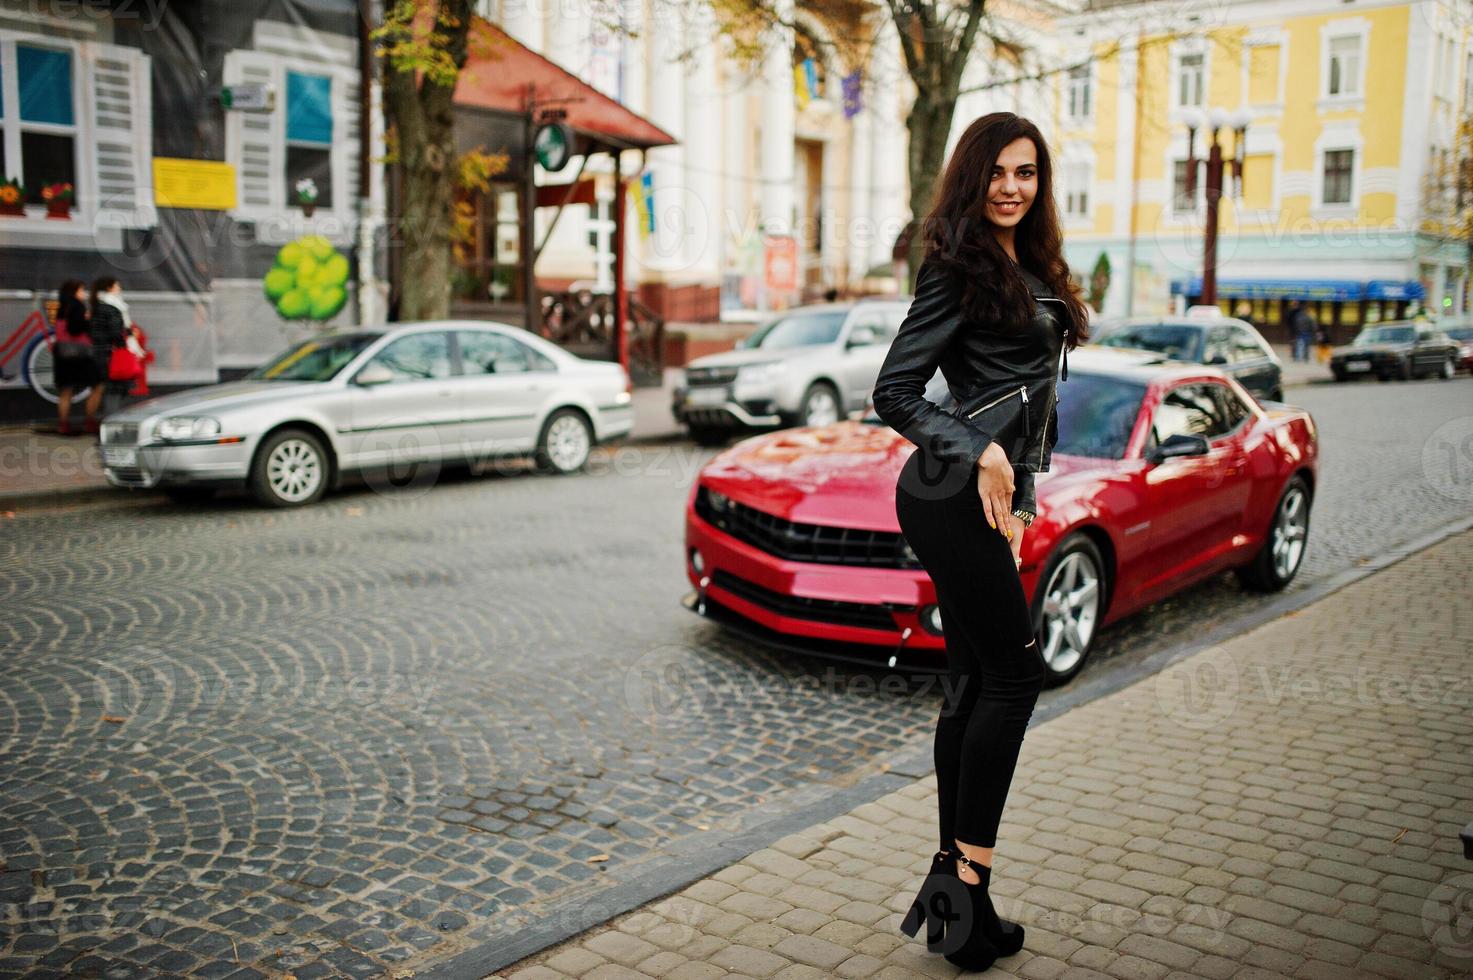 Young curly and sexy woman in leather jacket against red muscle car at street. photo